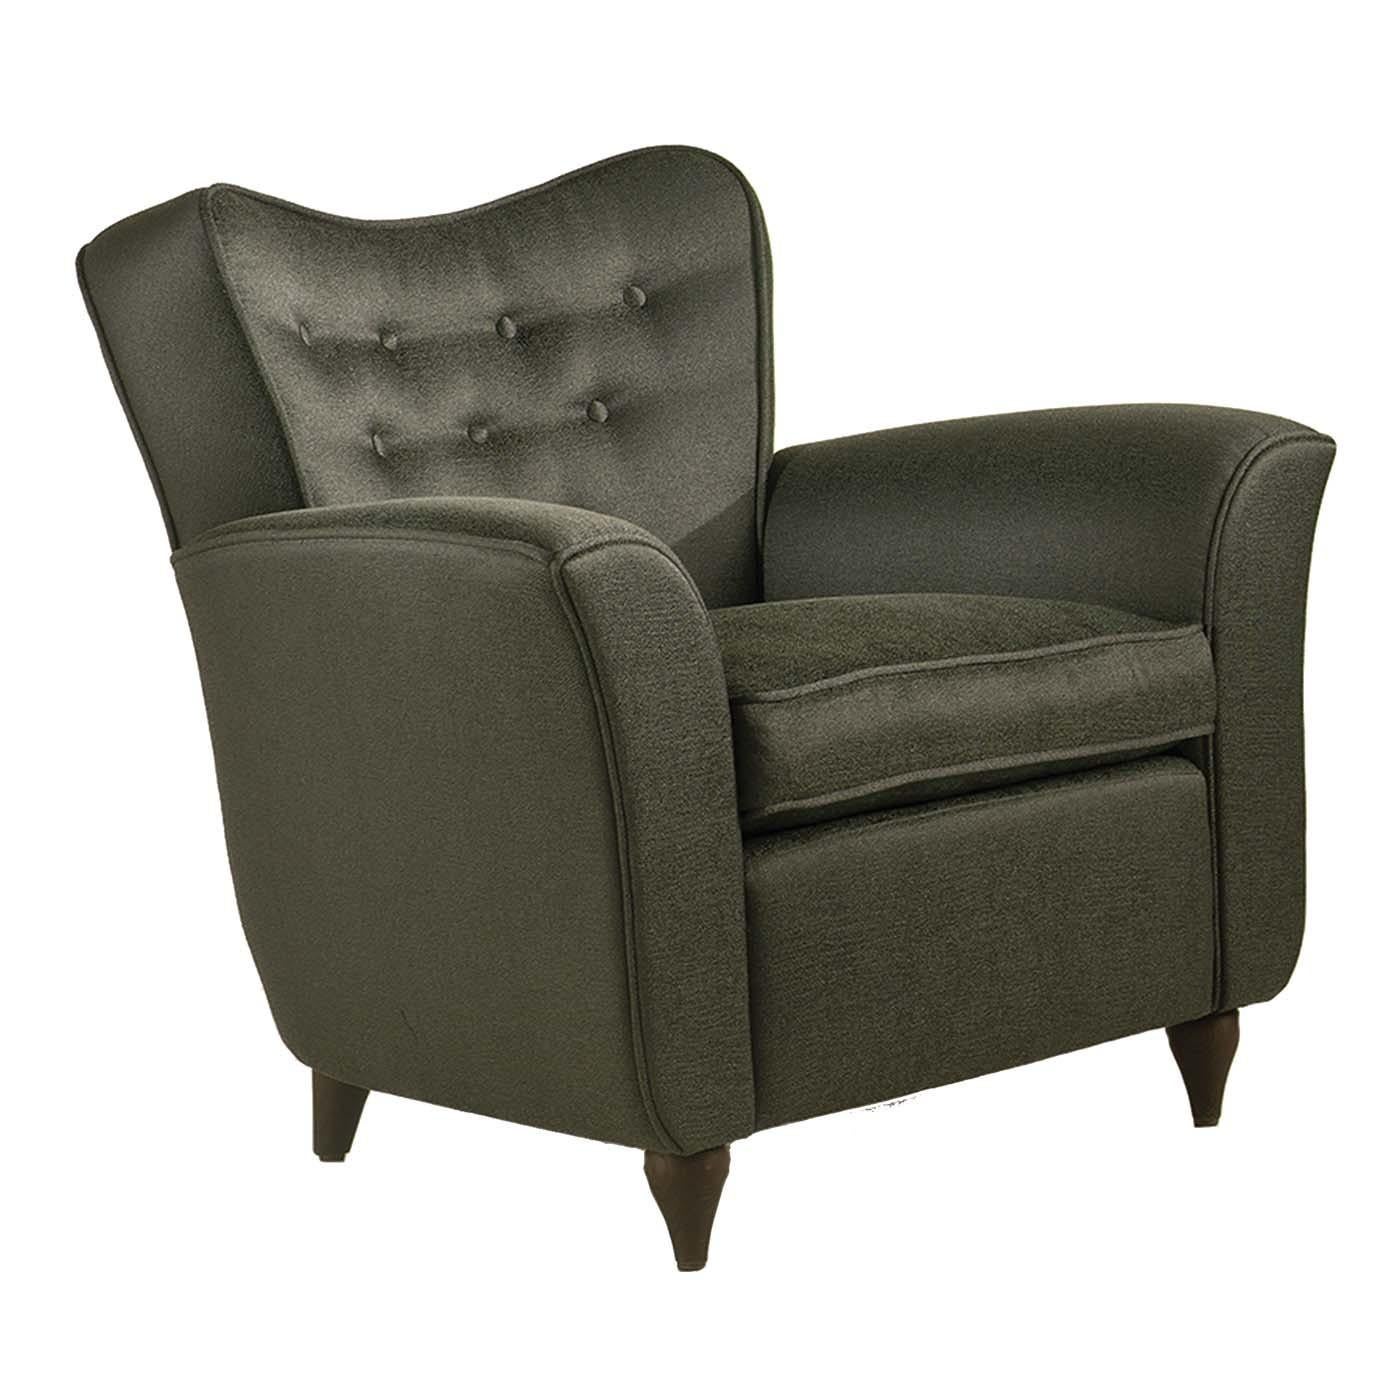 This elegant armchair boasts a welcoming silhouette obtained by the juxtaposition of padded curves, all contributing to its comfortable and cozy look. The wooden structure has a matte dark walnut finish, visible in the feet adorned with antique